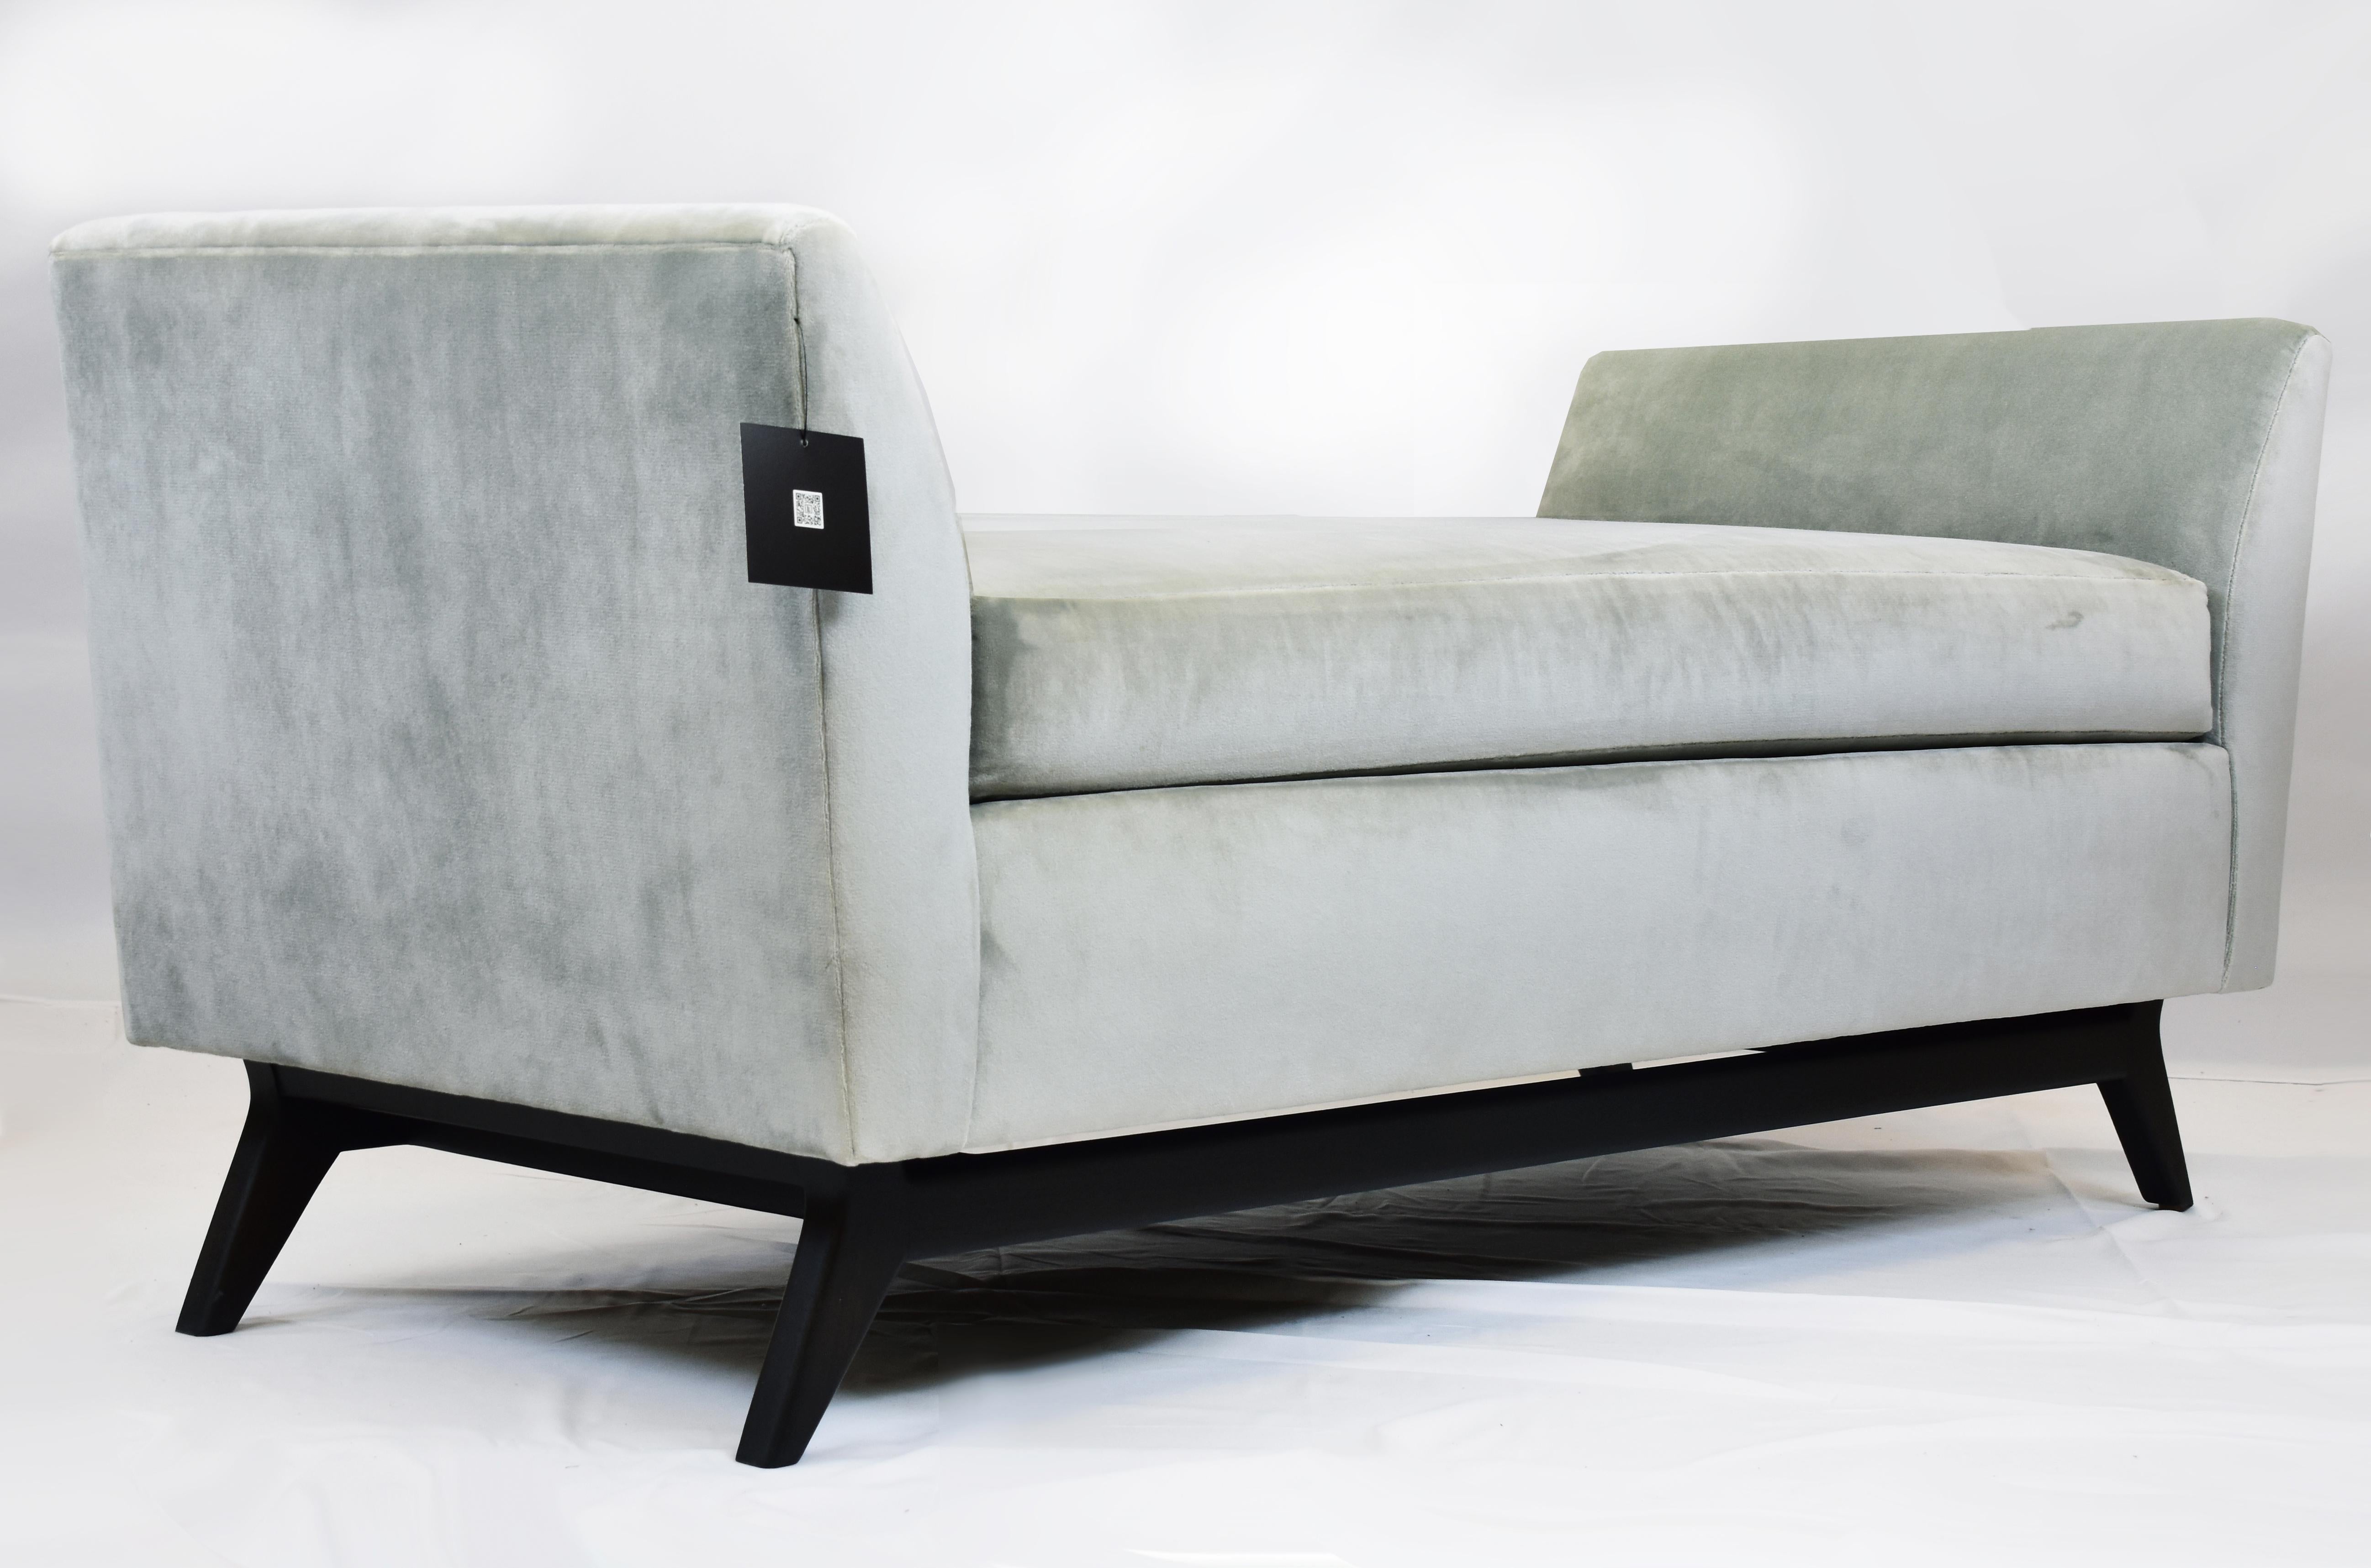 Le Jeune Upholstery Melina Bench Showroom Model in Velvet and Walnut

Offered for sale is a MELINA	B3.923 Bench showroom model.	The bench is inspired by the designs of the mid-century modern era having slight flared arms and an angled Walnut wood